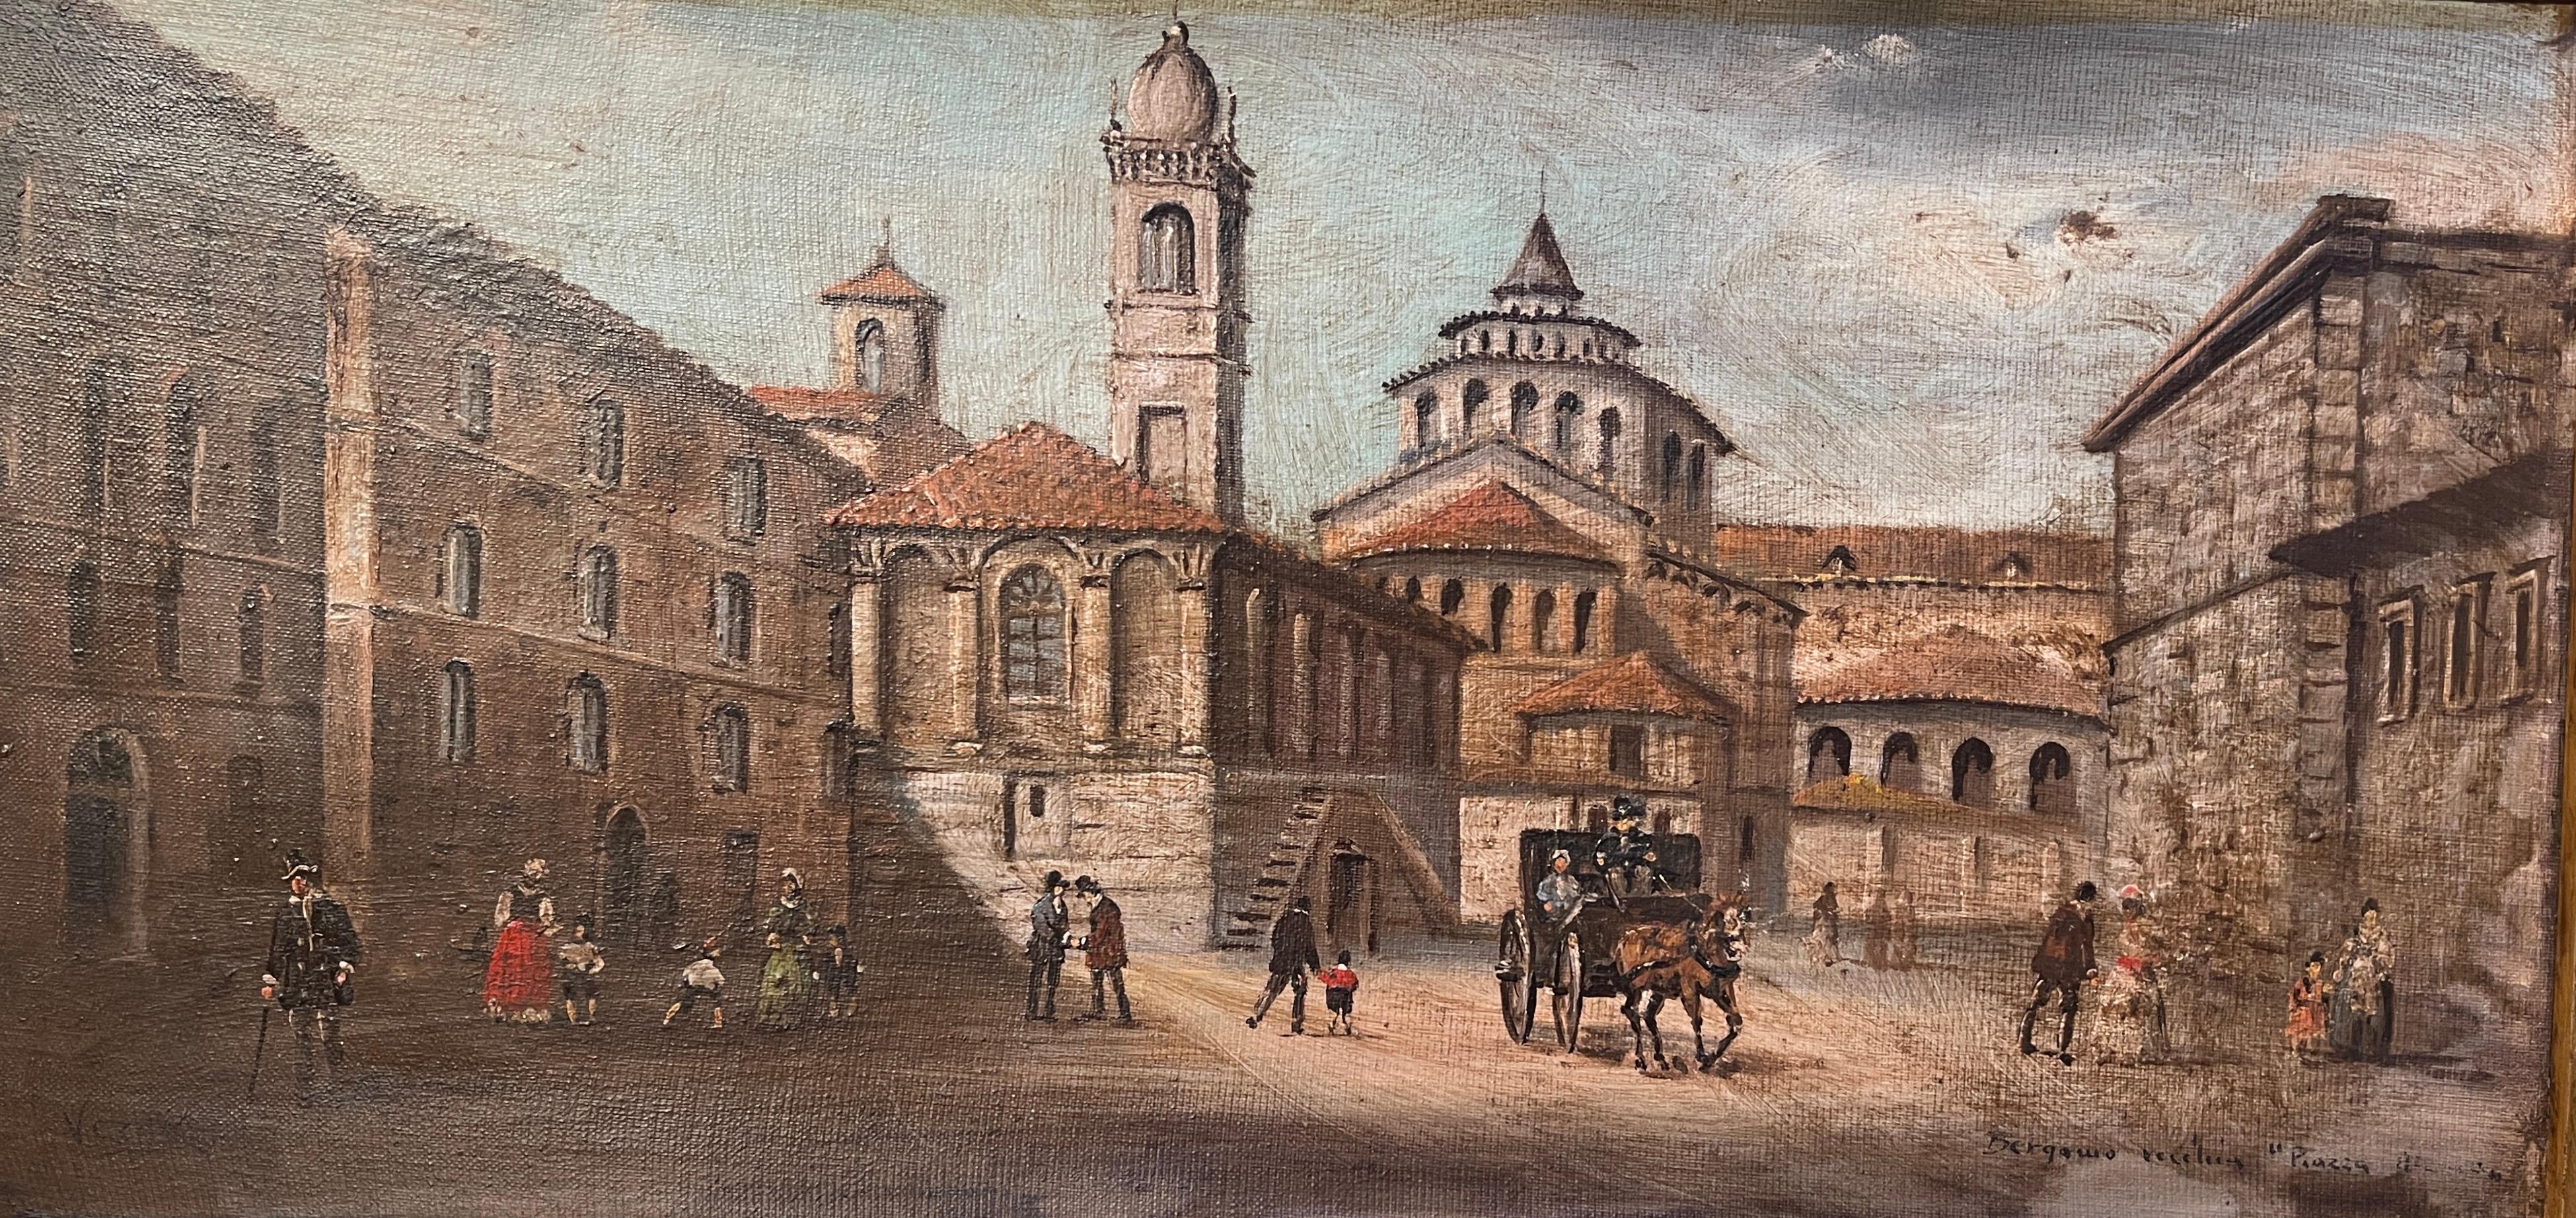 Oil painting on panel, 20th century, Vergani, landscape
Refined and detailed oil painting on panel depicting a glimpse of 